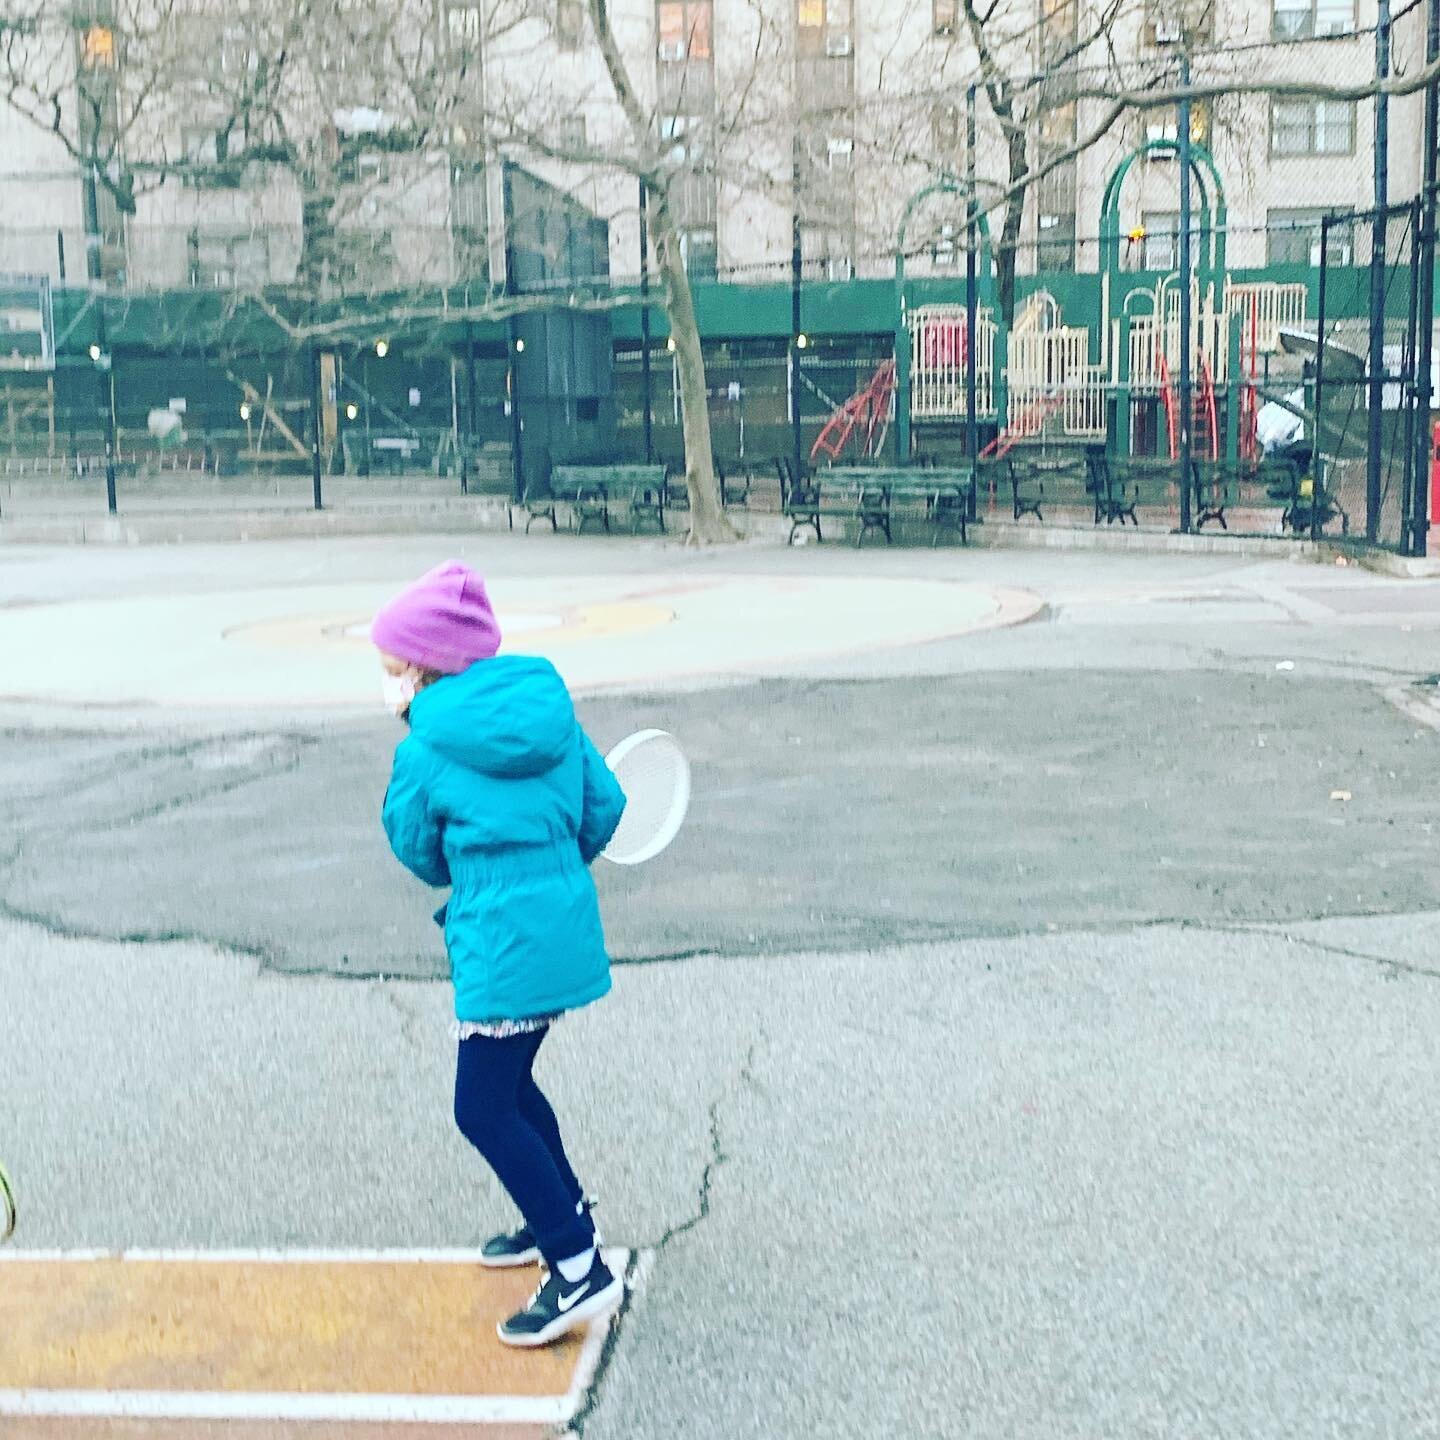 Starting at an early age helps! Sign up for tennis classes at www.brainiactennis.com/lessons Tag five friends for a chance at a free private lesson. #afterschoolactivitiesforkids #activitiesforkids #activitiesfortoddlers #activitiesforchildren #kidsc